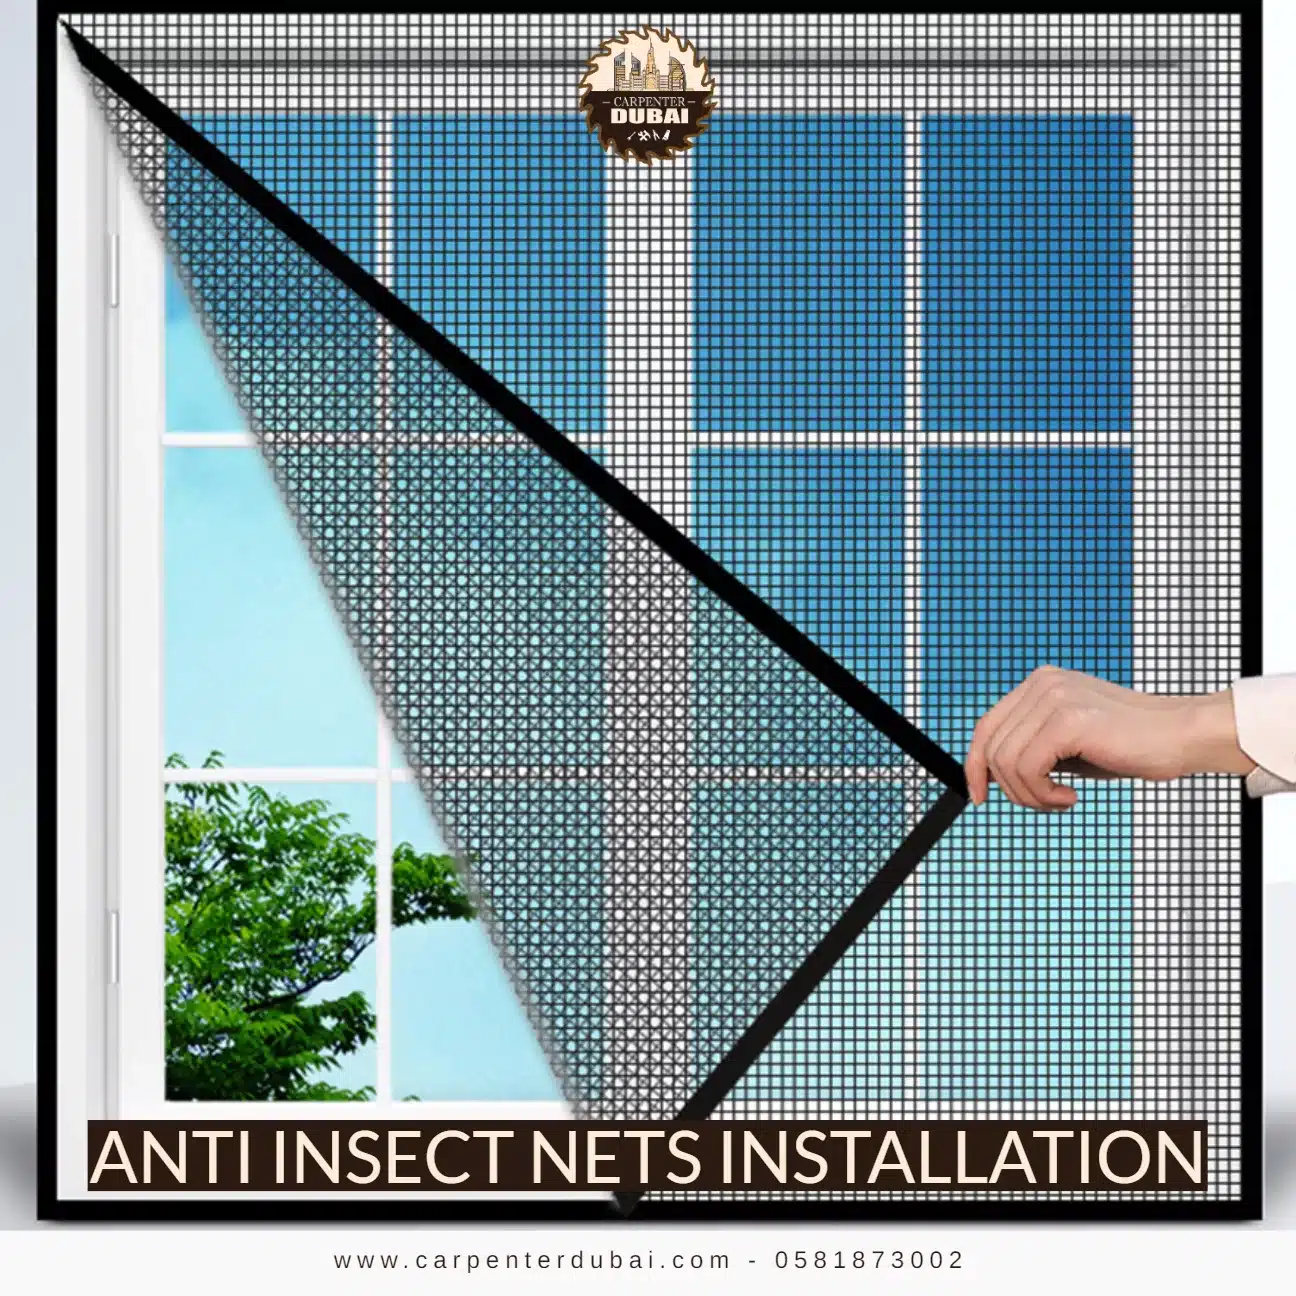 Anti Insect Nets Installation